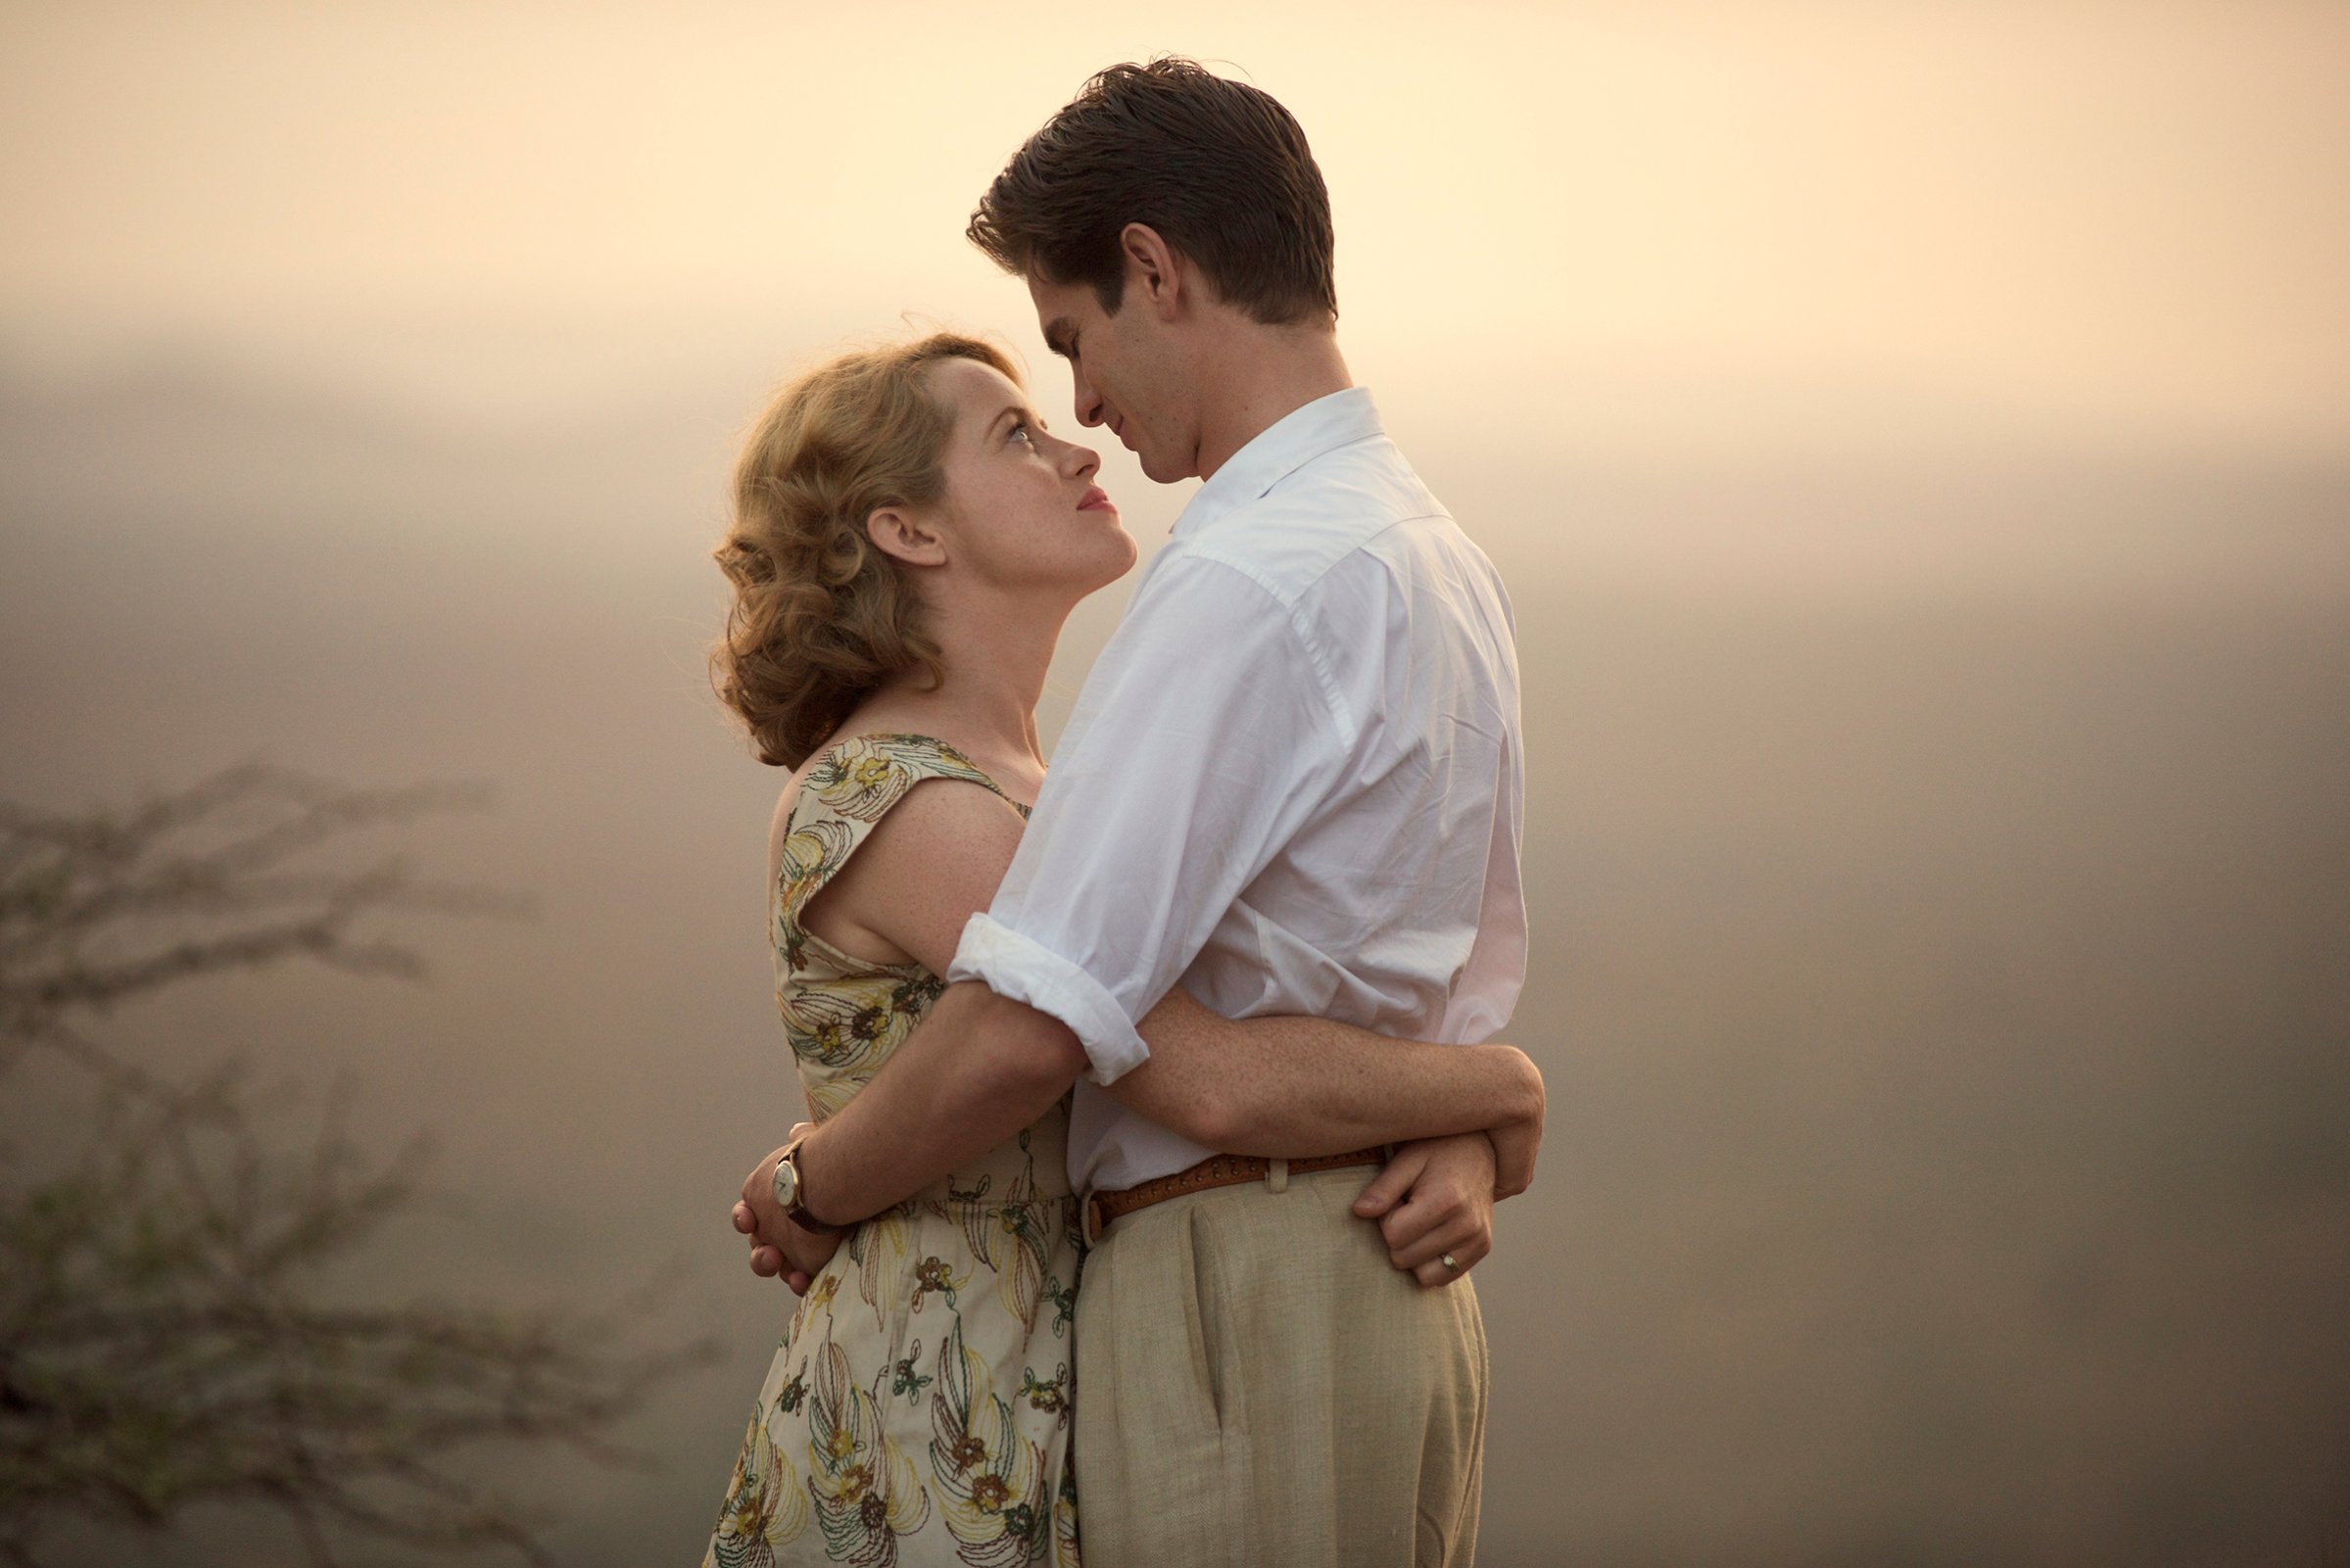 Garfield and Foy build a sturdy foundation in Breathe